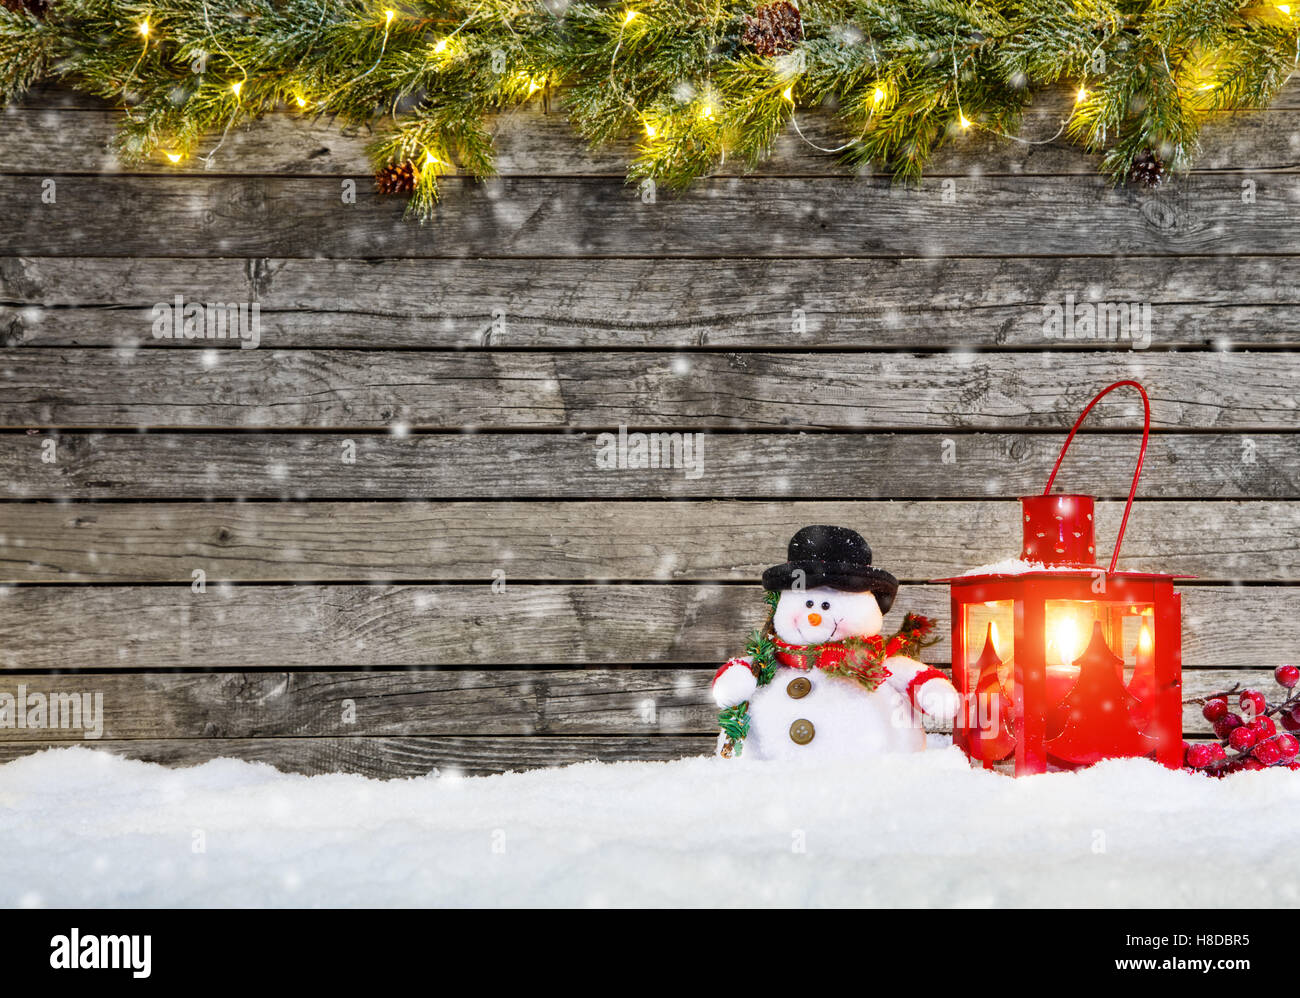 Christmas background with snowman and red lantern in snow. Fir decoration branches on top Stock Photo